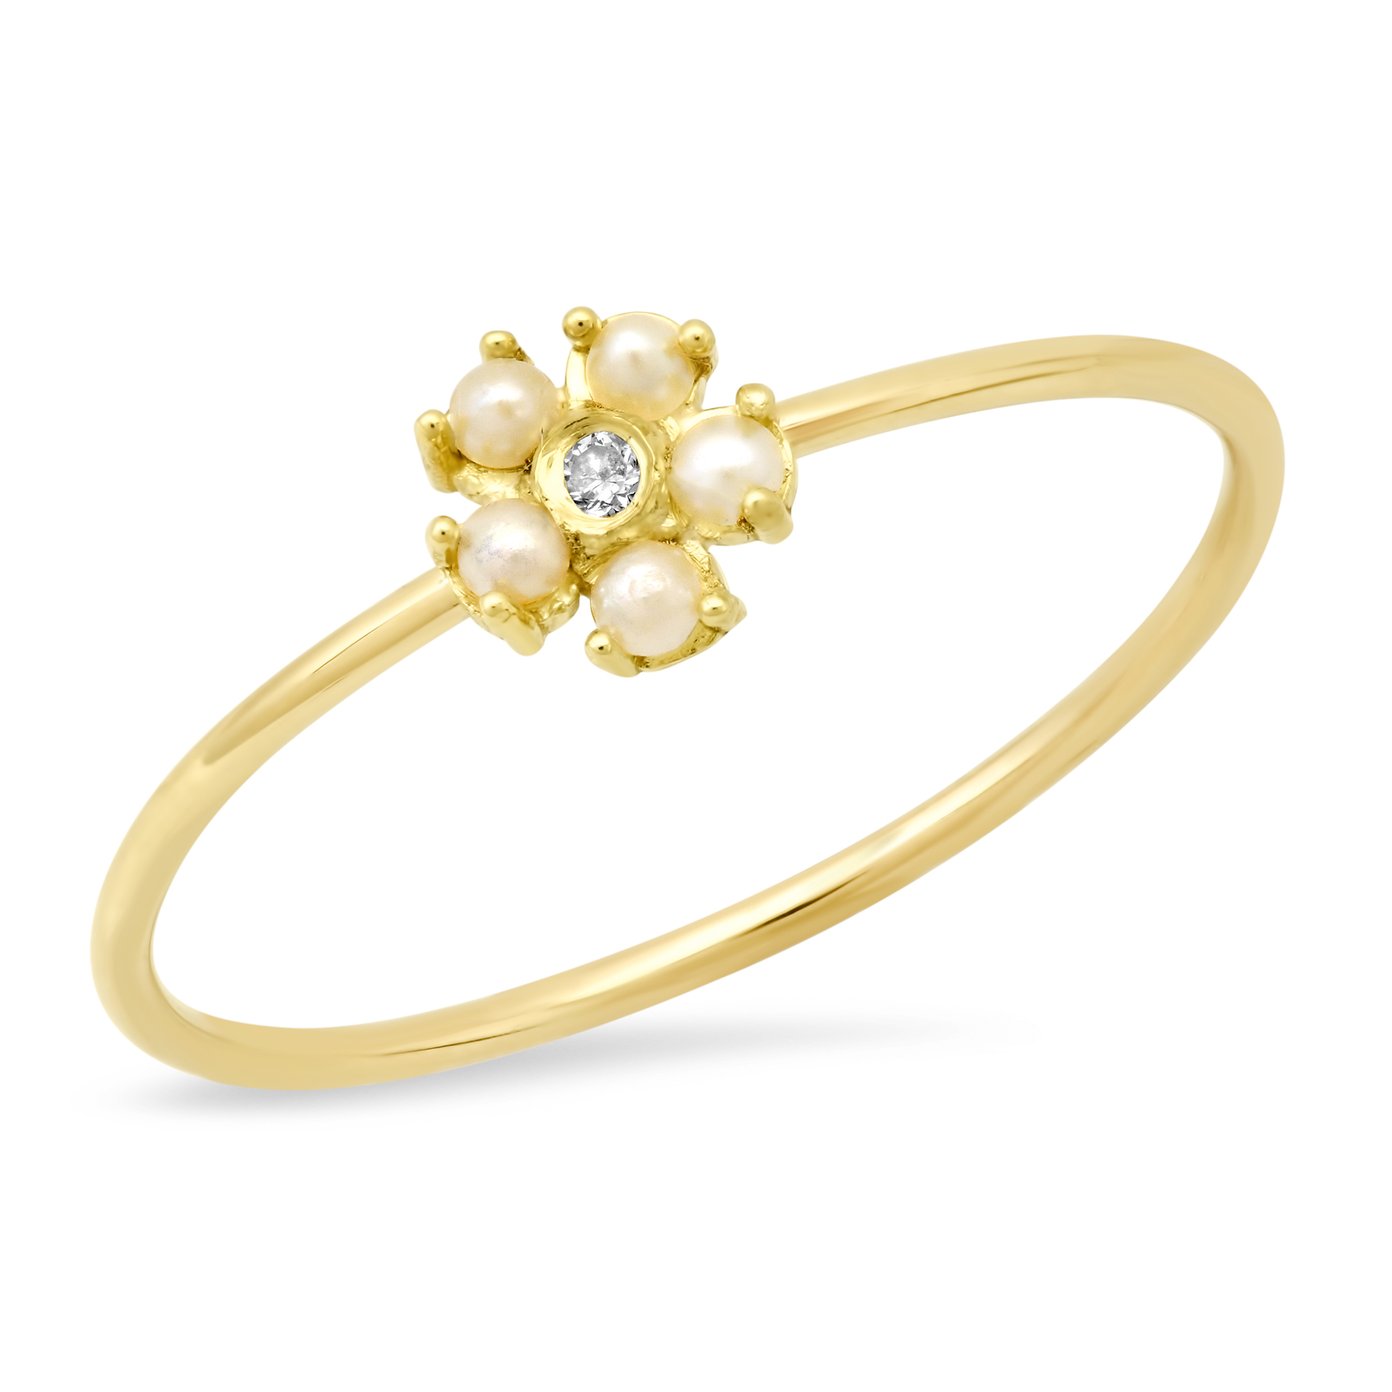 What Is My Ring Size? – Amy Jennifer Jewellery